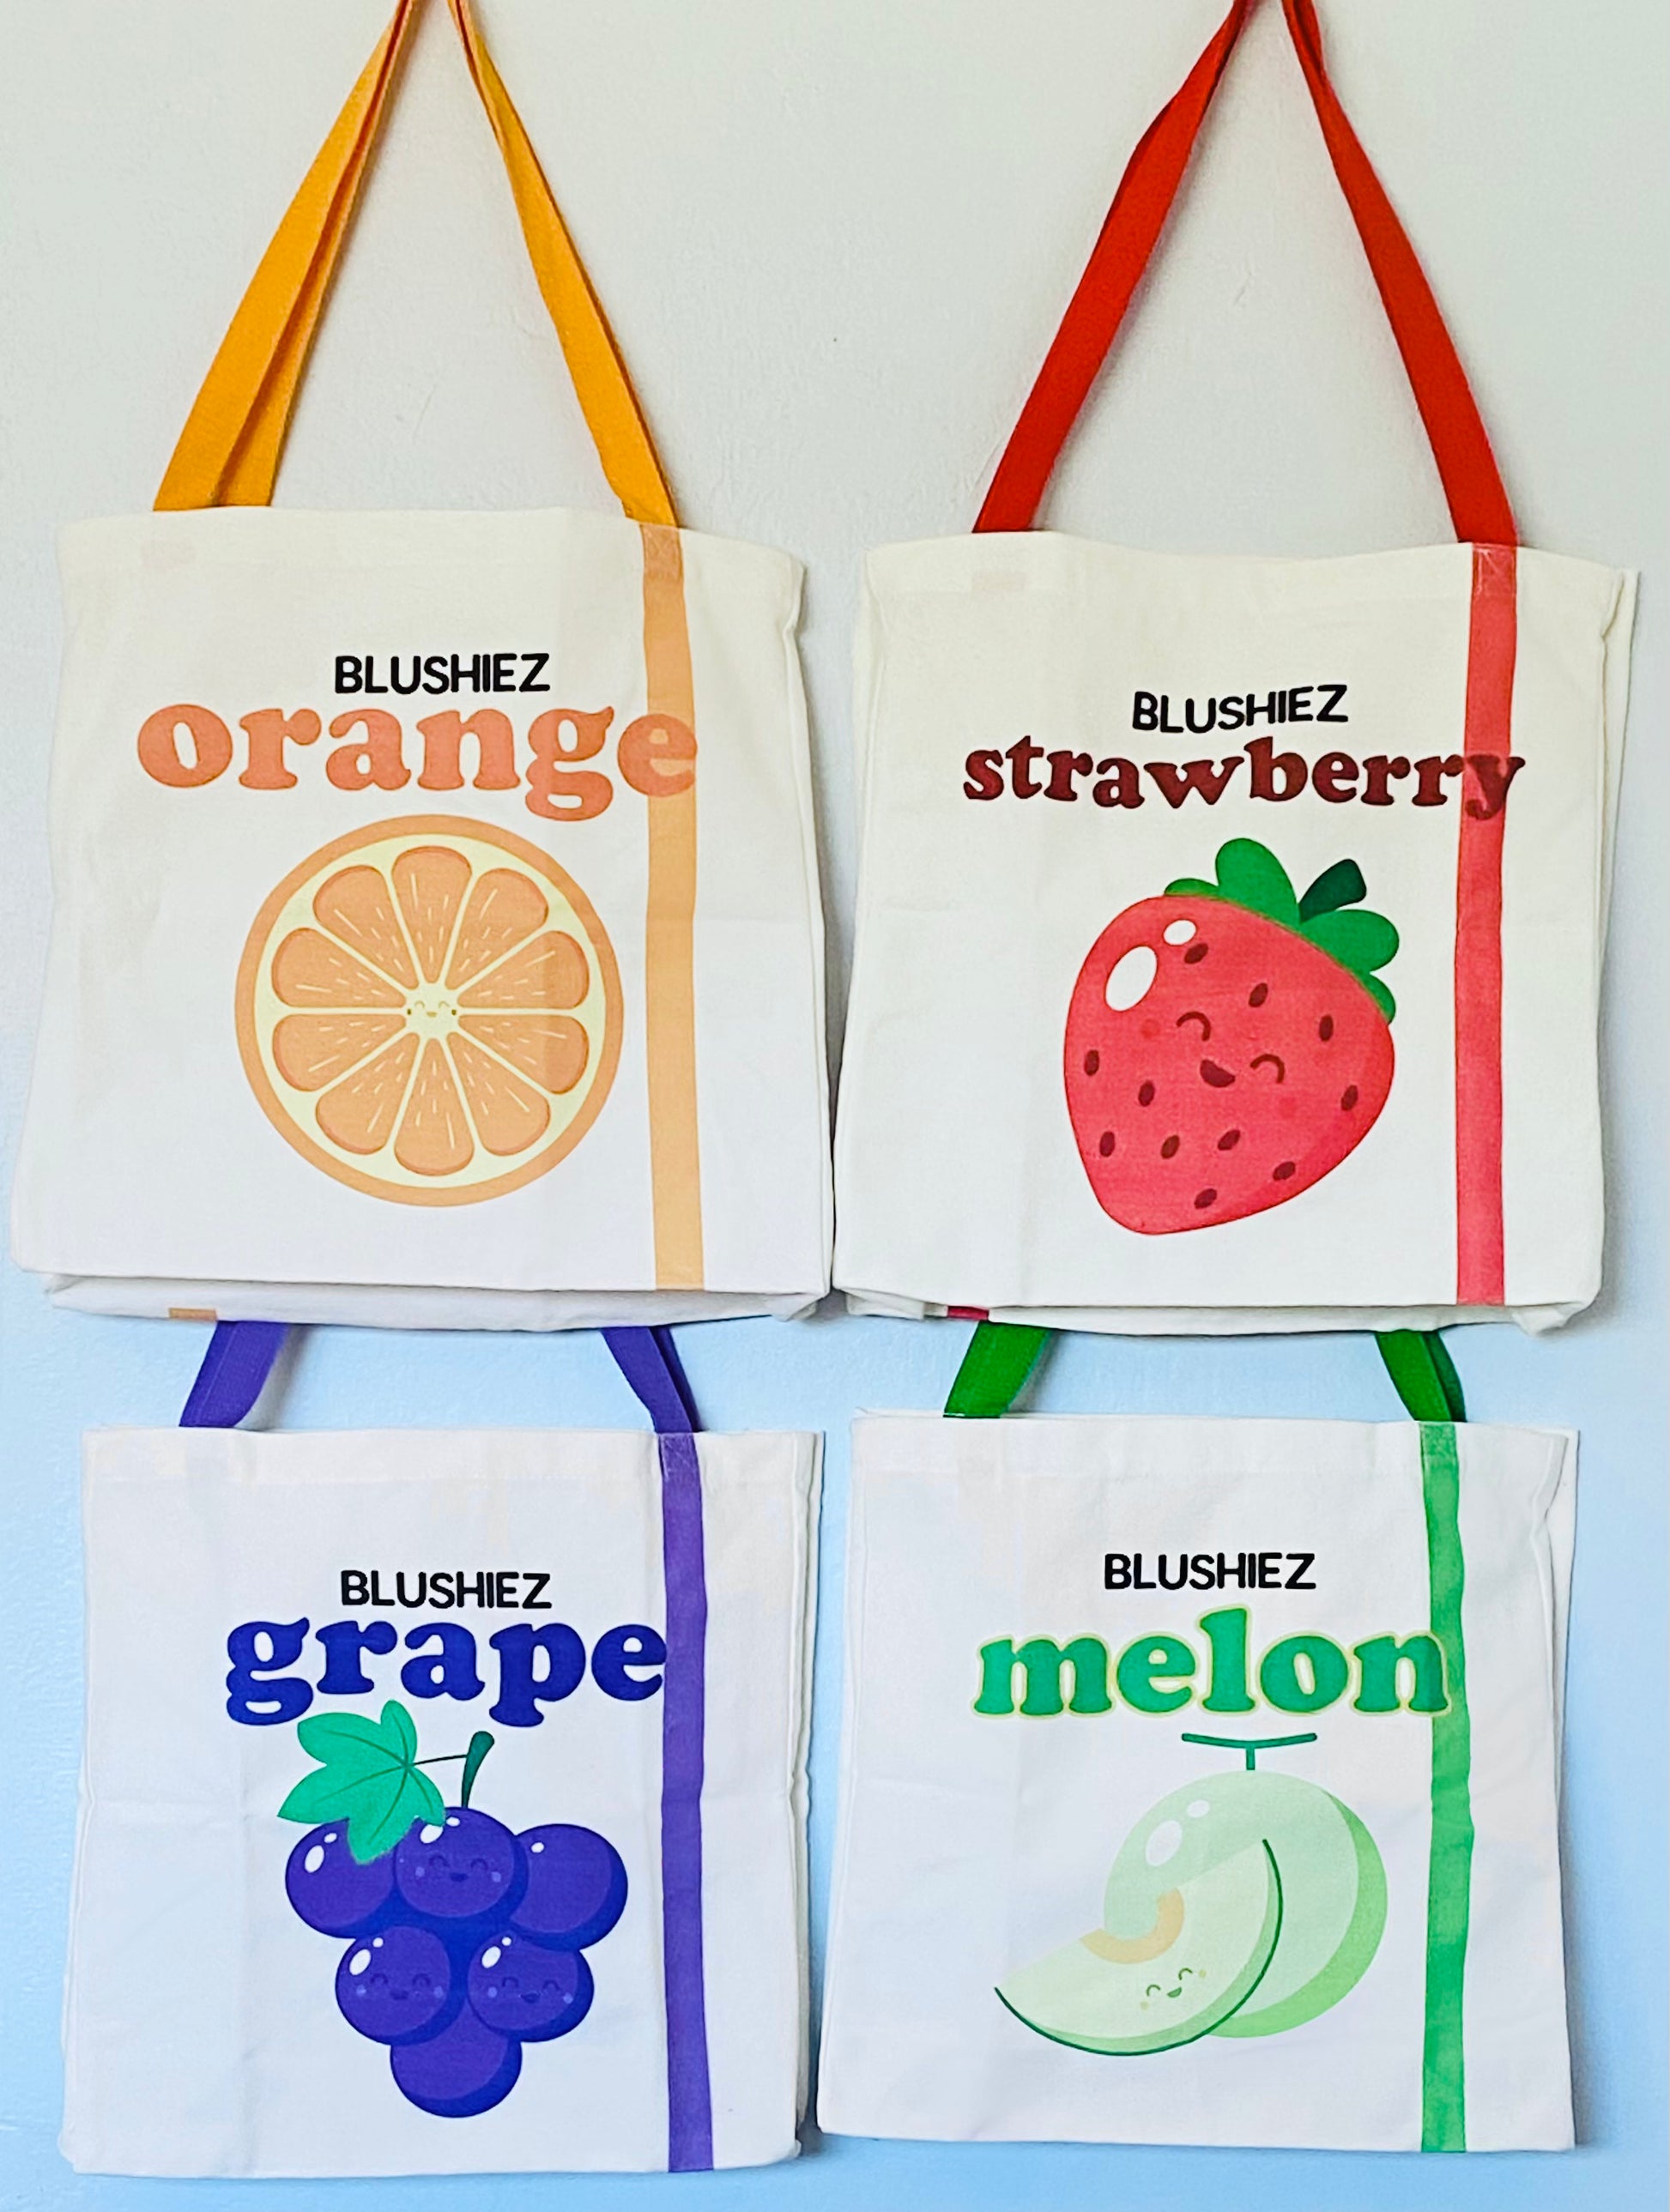 limited edition bags